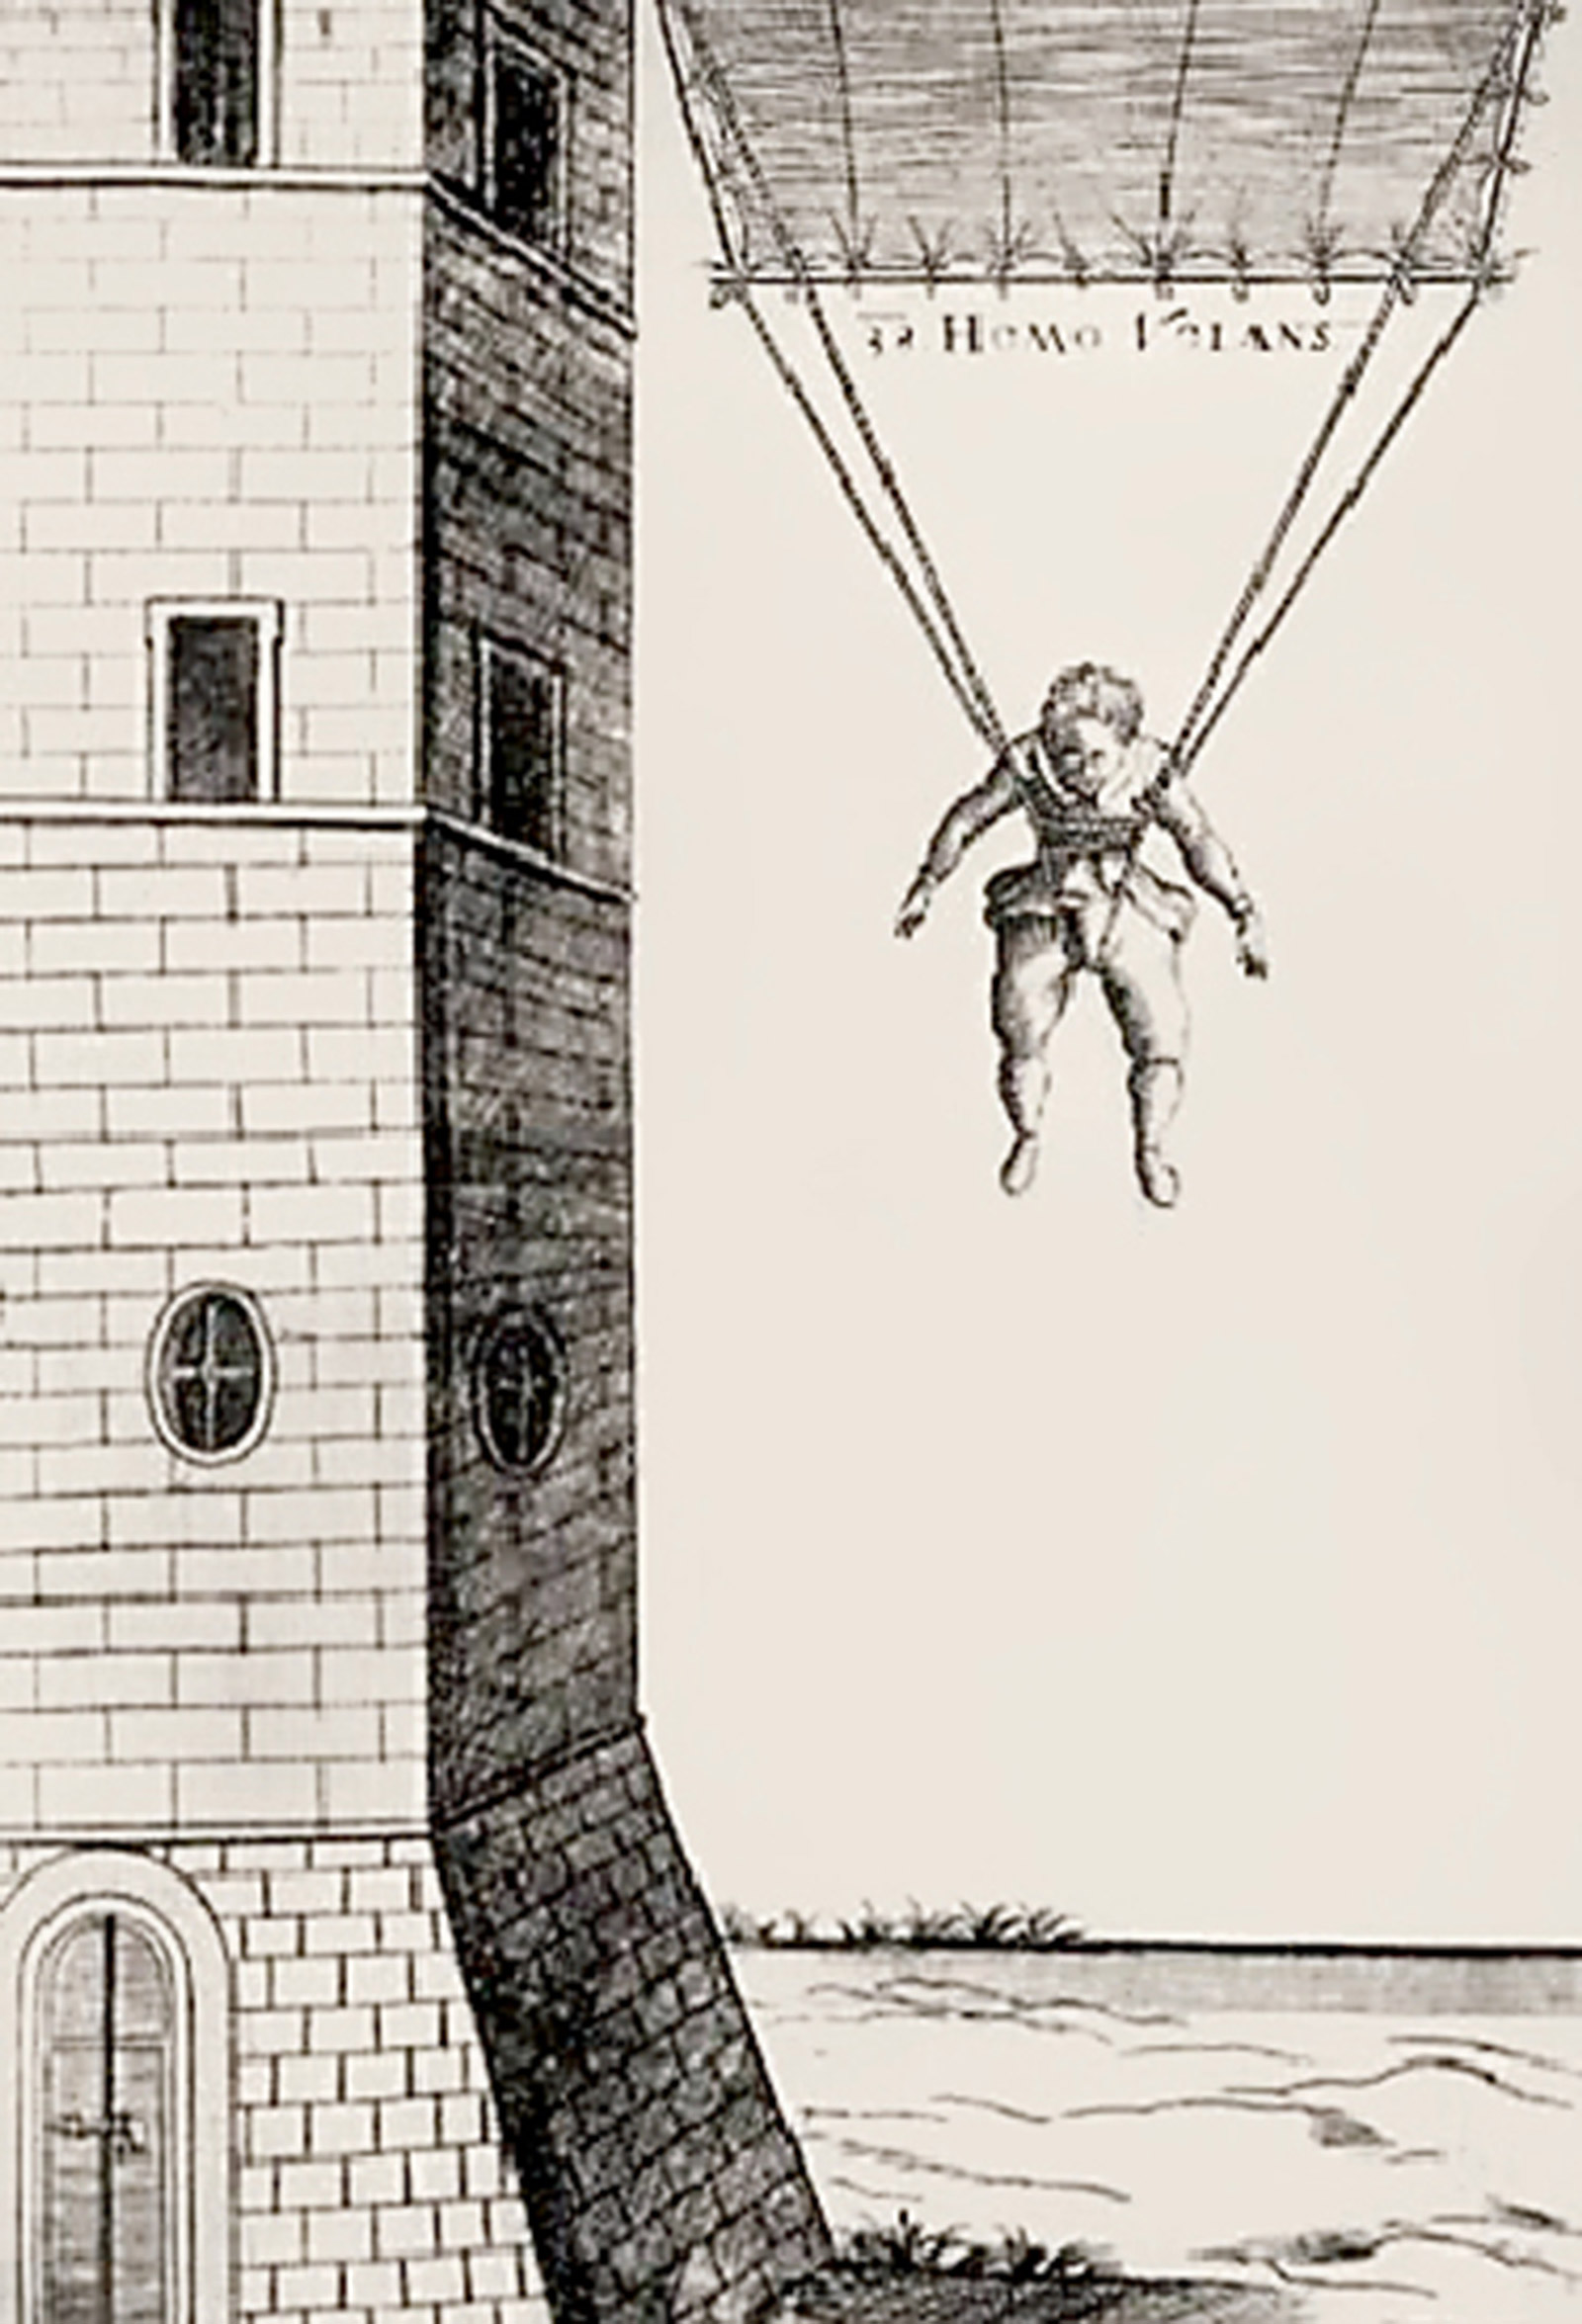 An illustration of Faust Vrancic leaping from a Venetian tower.